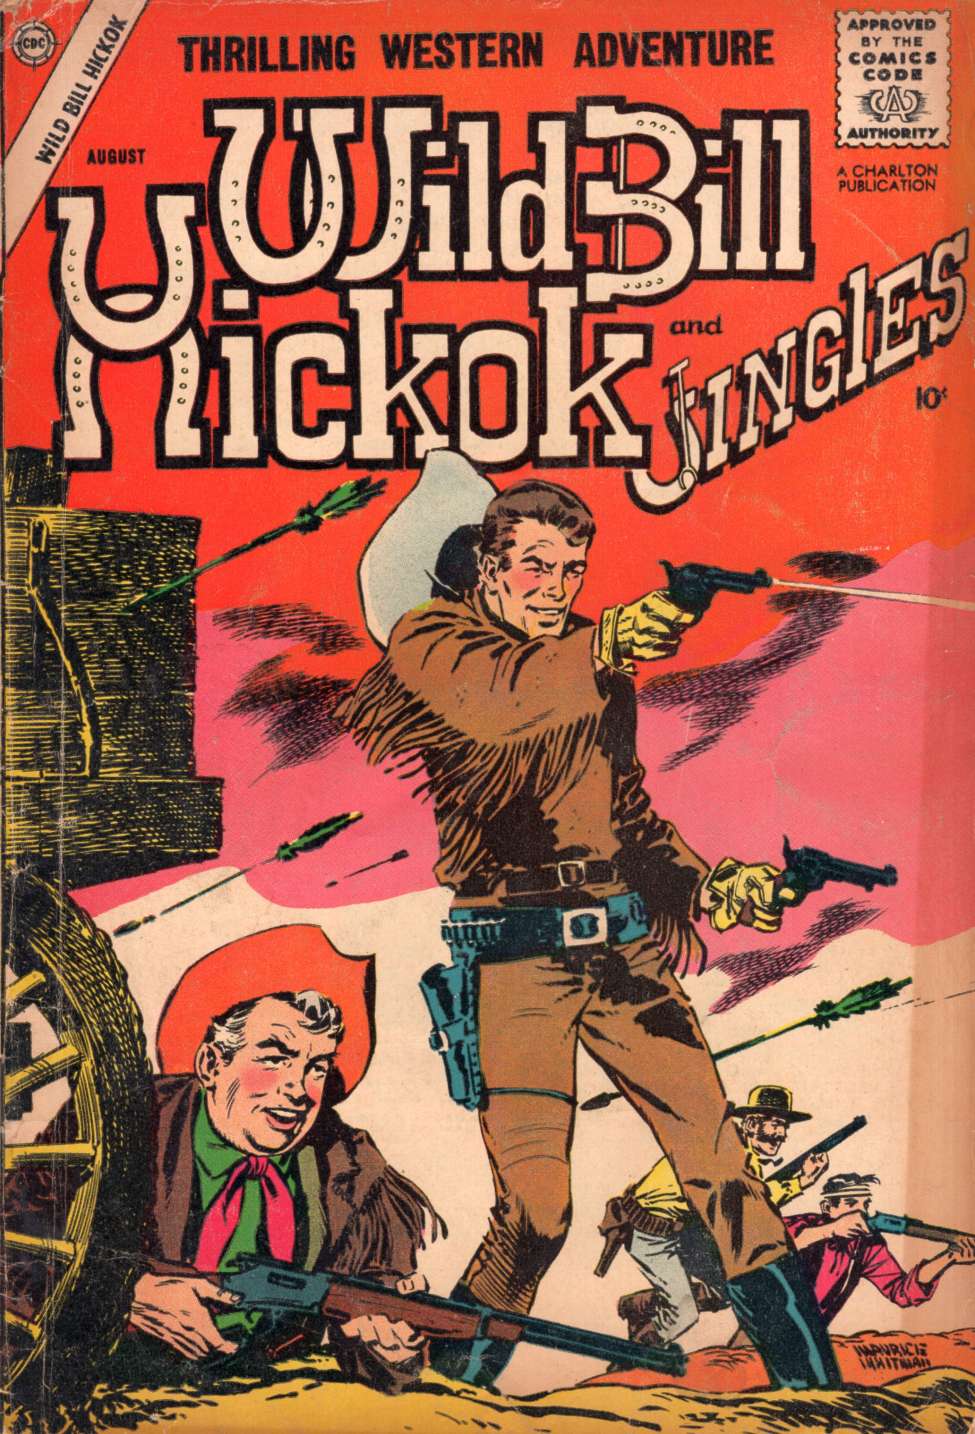 Book Cover For Wild Bill Hickok and Jingles 68 - Version 2